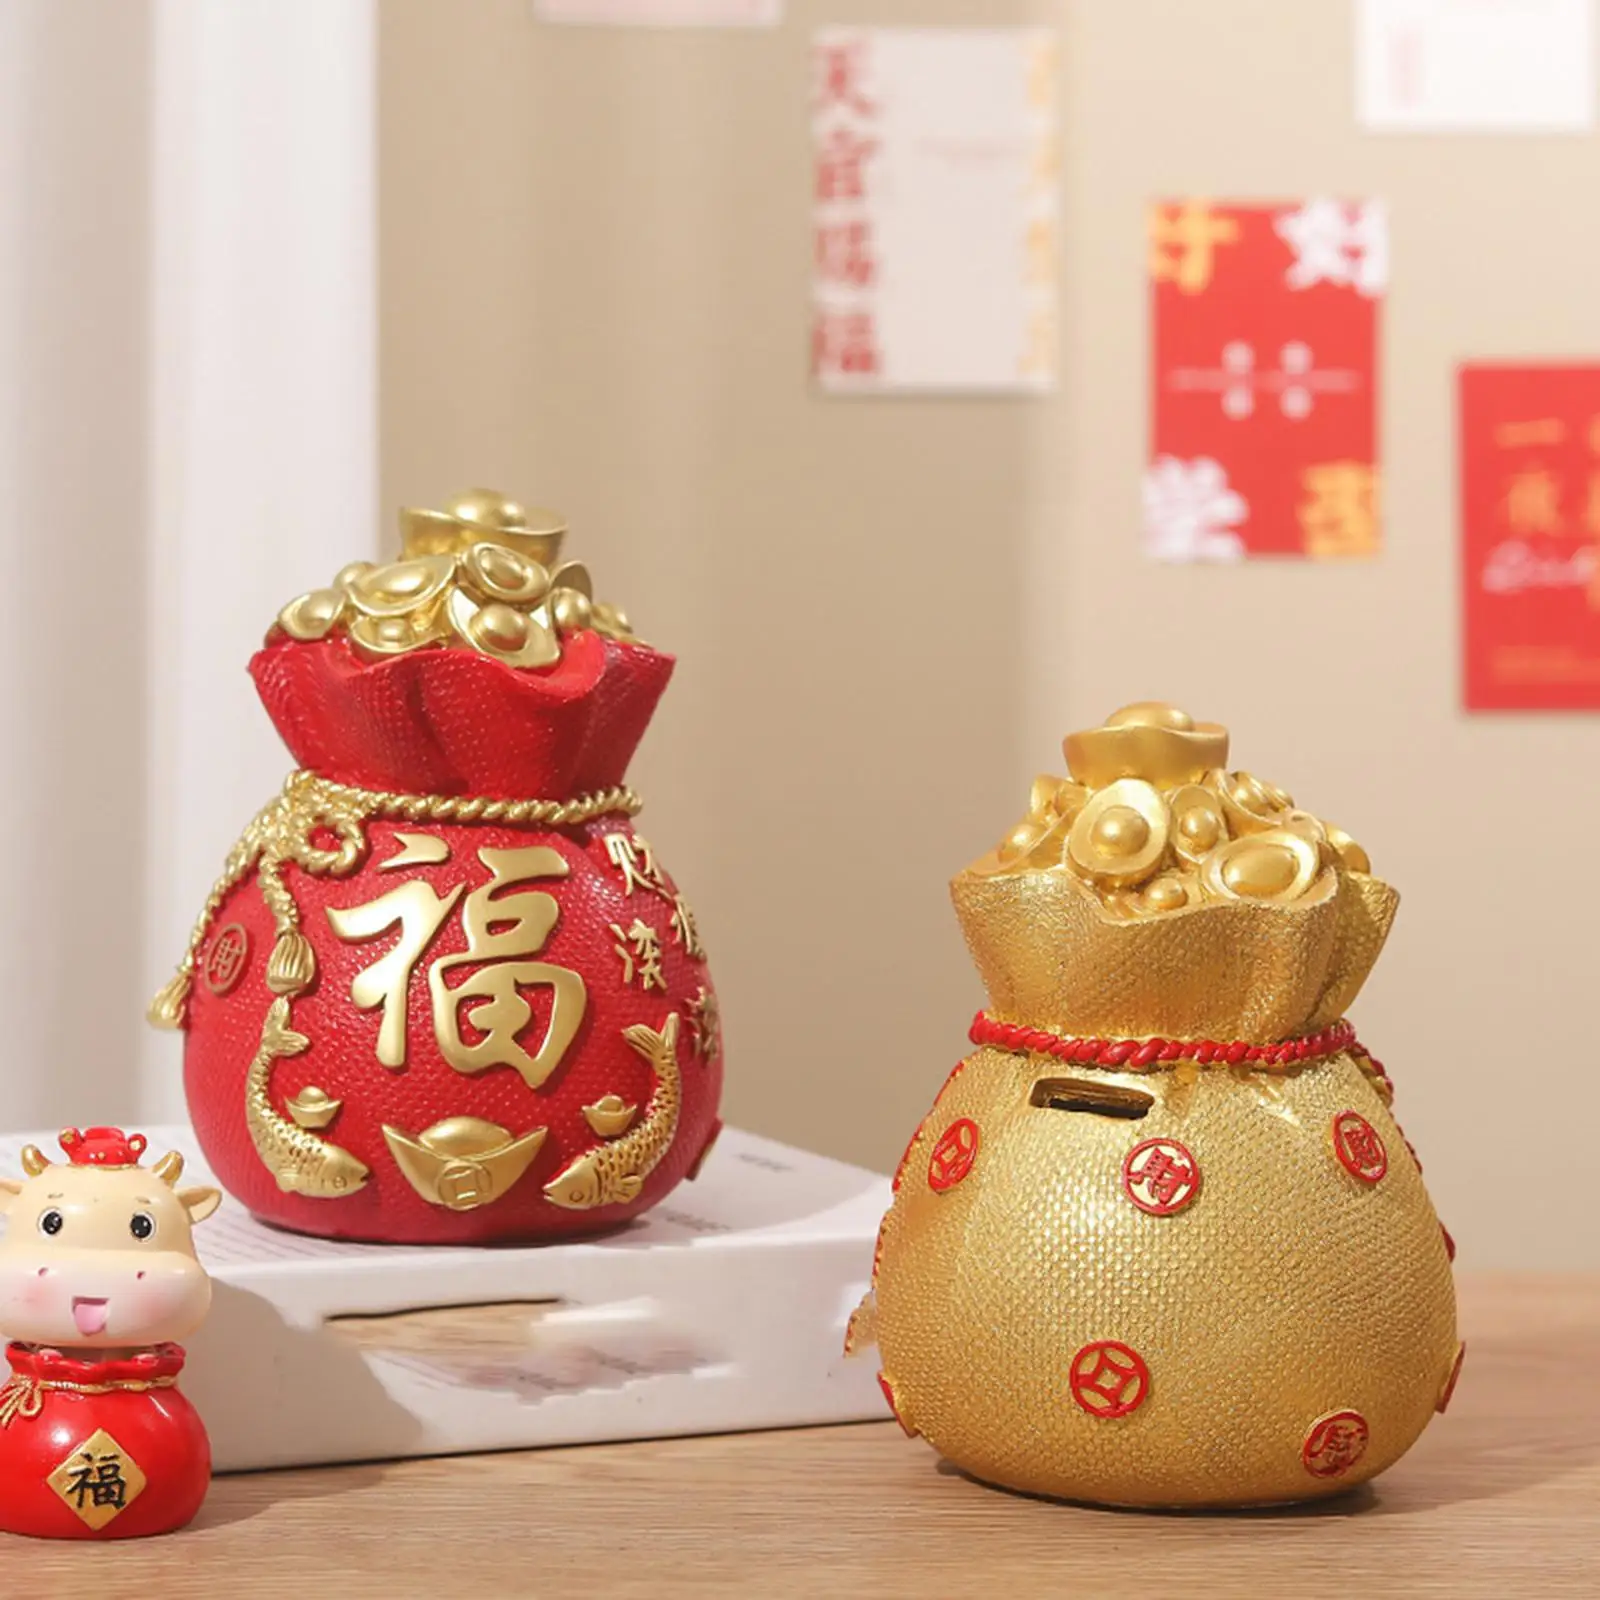 Resin Lucky Bag Piggy Bank Wealth Luck Coin Box Figurines Money Boxes Art Crafts for Tabletop Wedding Bedroom Home Decoration